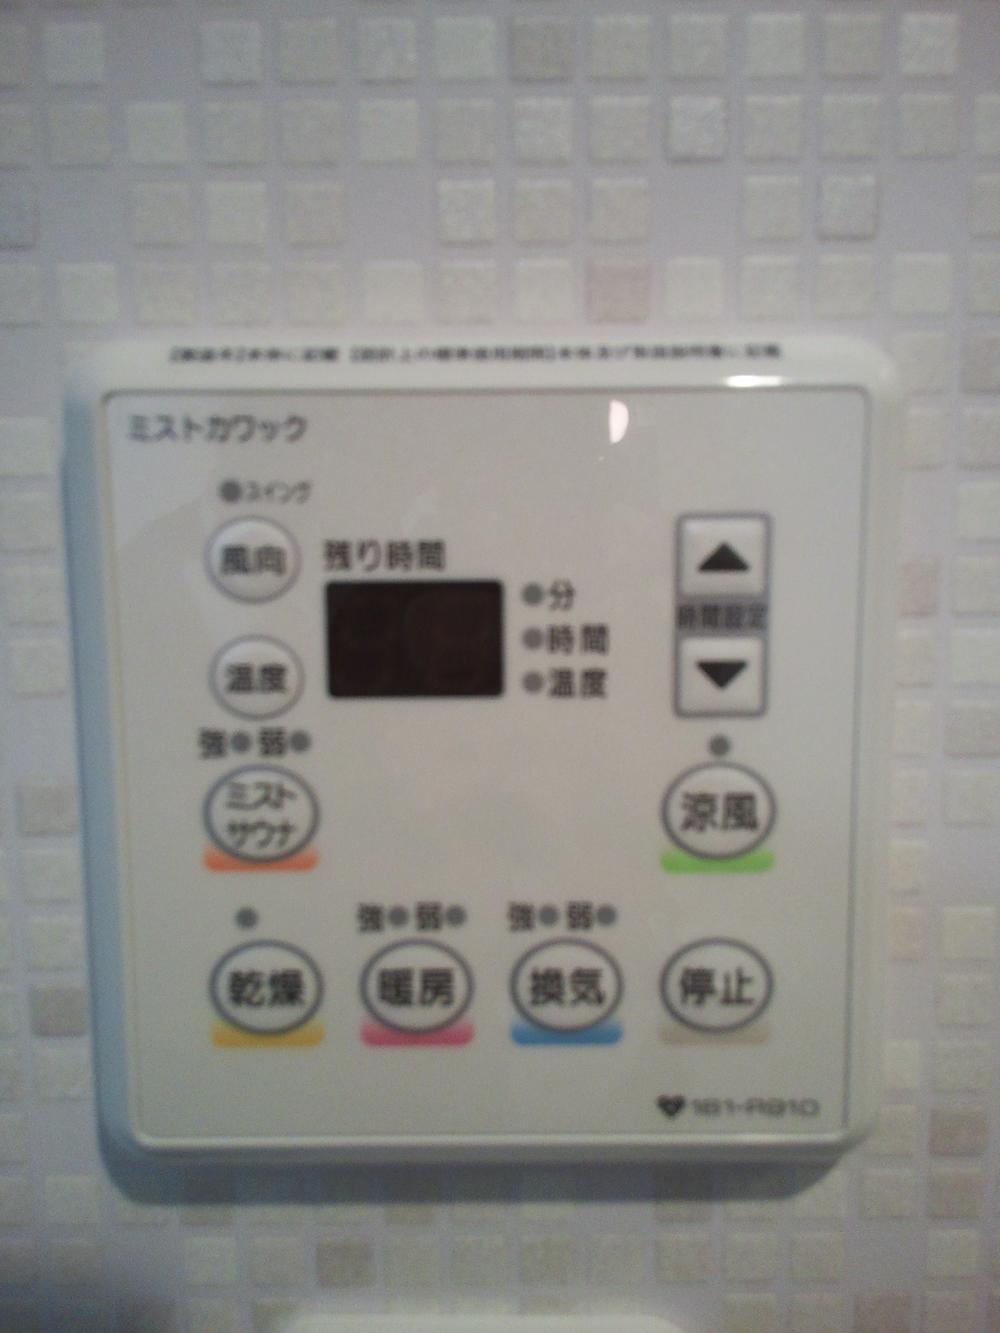 Other. One-touch preparation of the bath in Otobasu